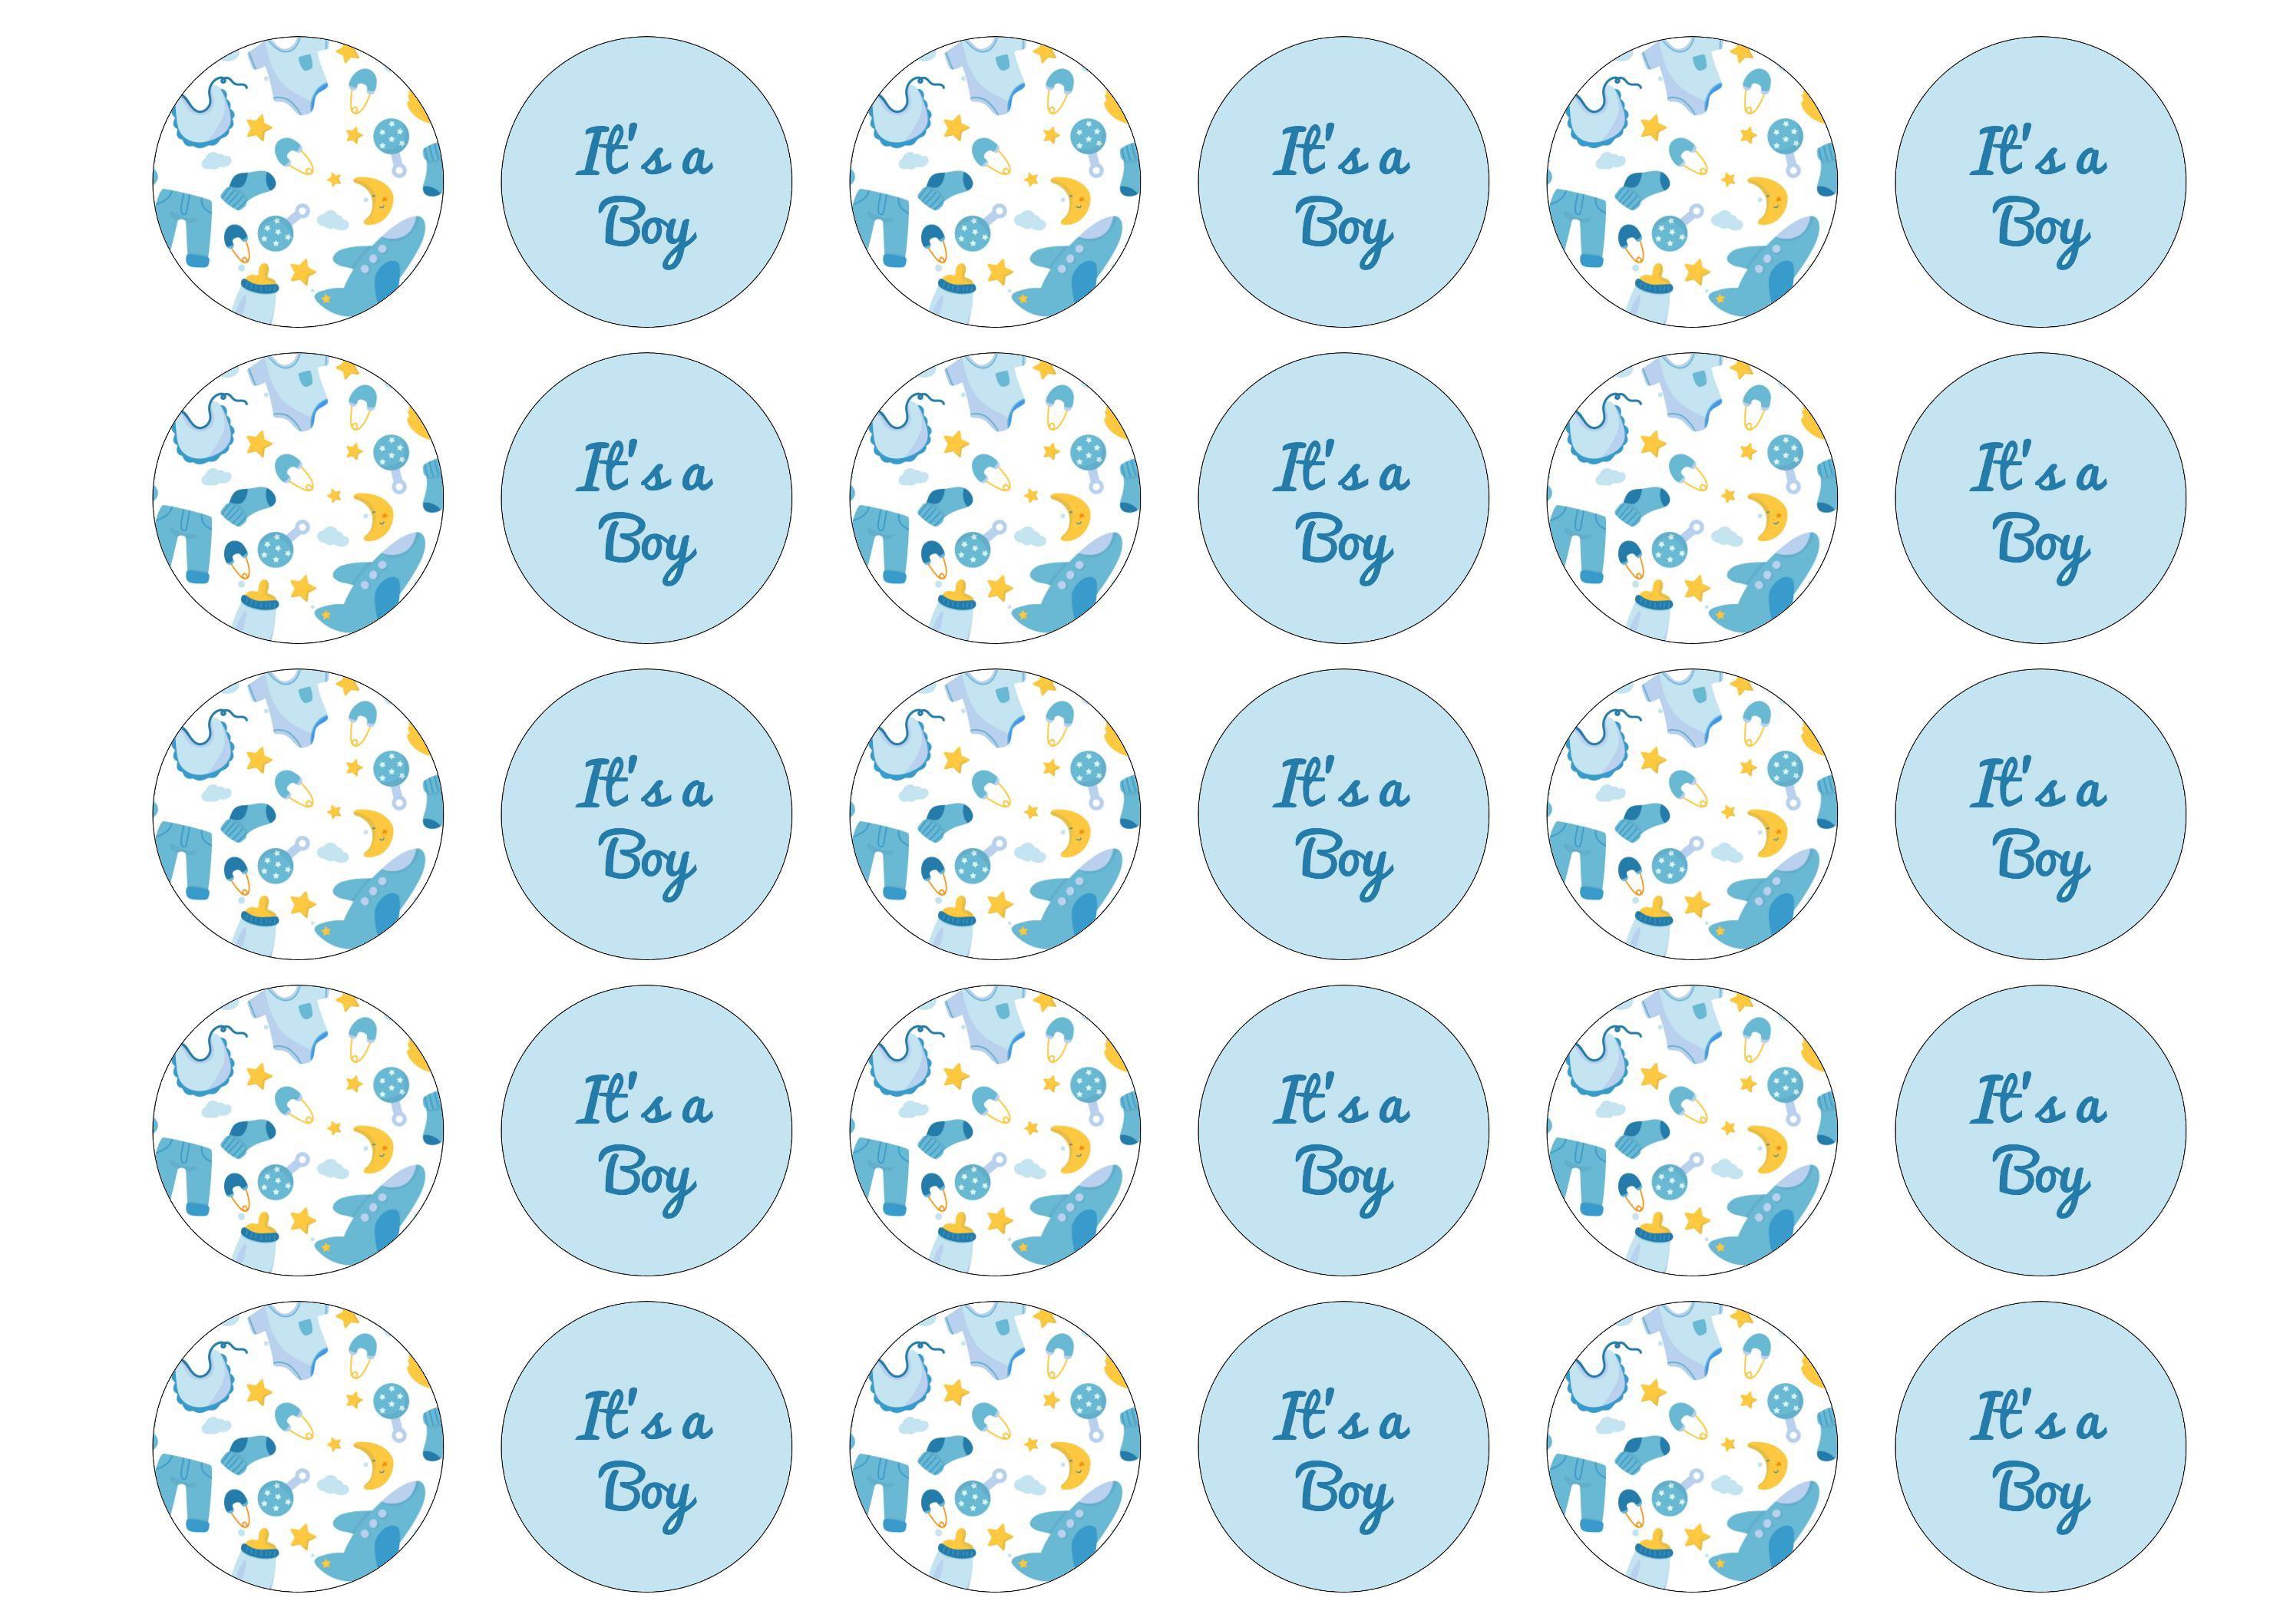 30 toppers with blue and yellow it's a boy images